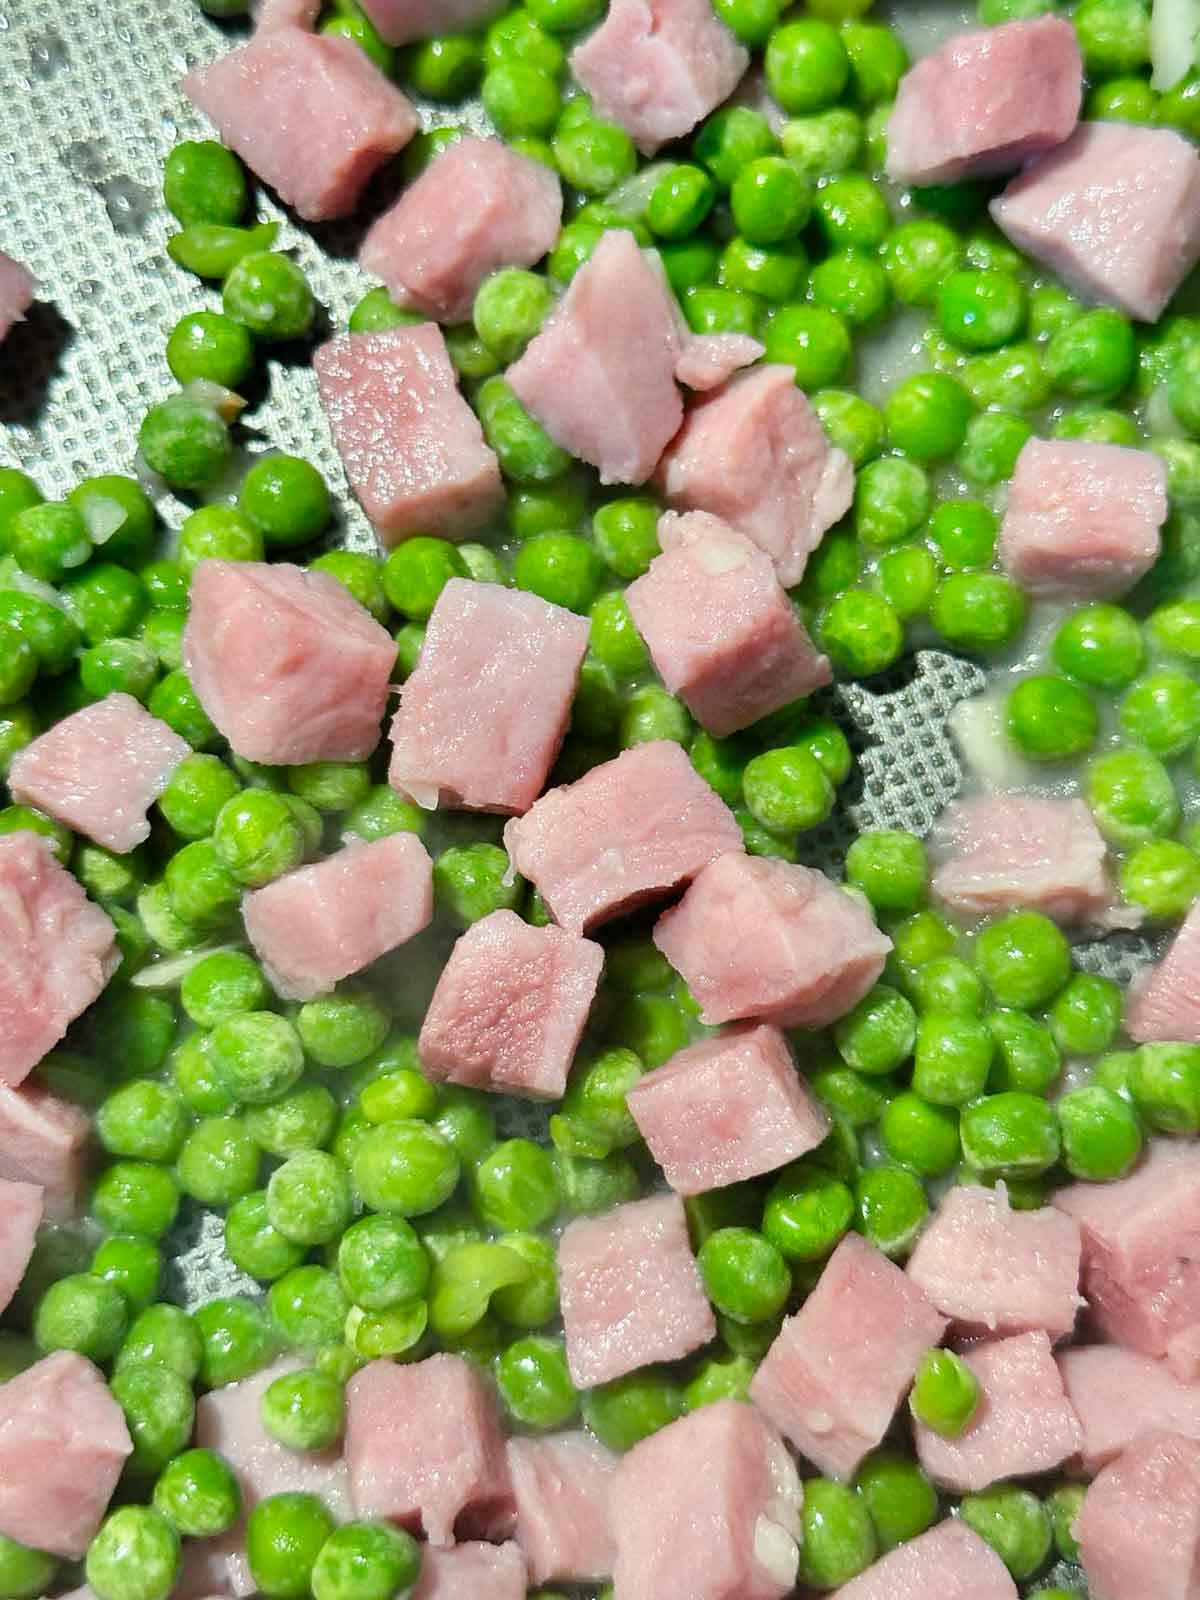 Add the peas to the pan with the seared ham and garlic butter.